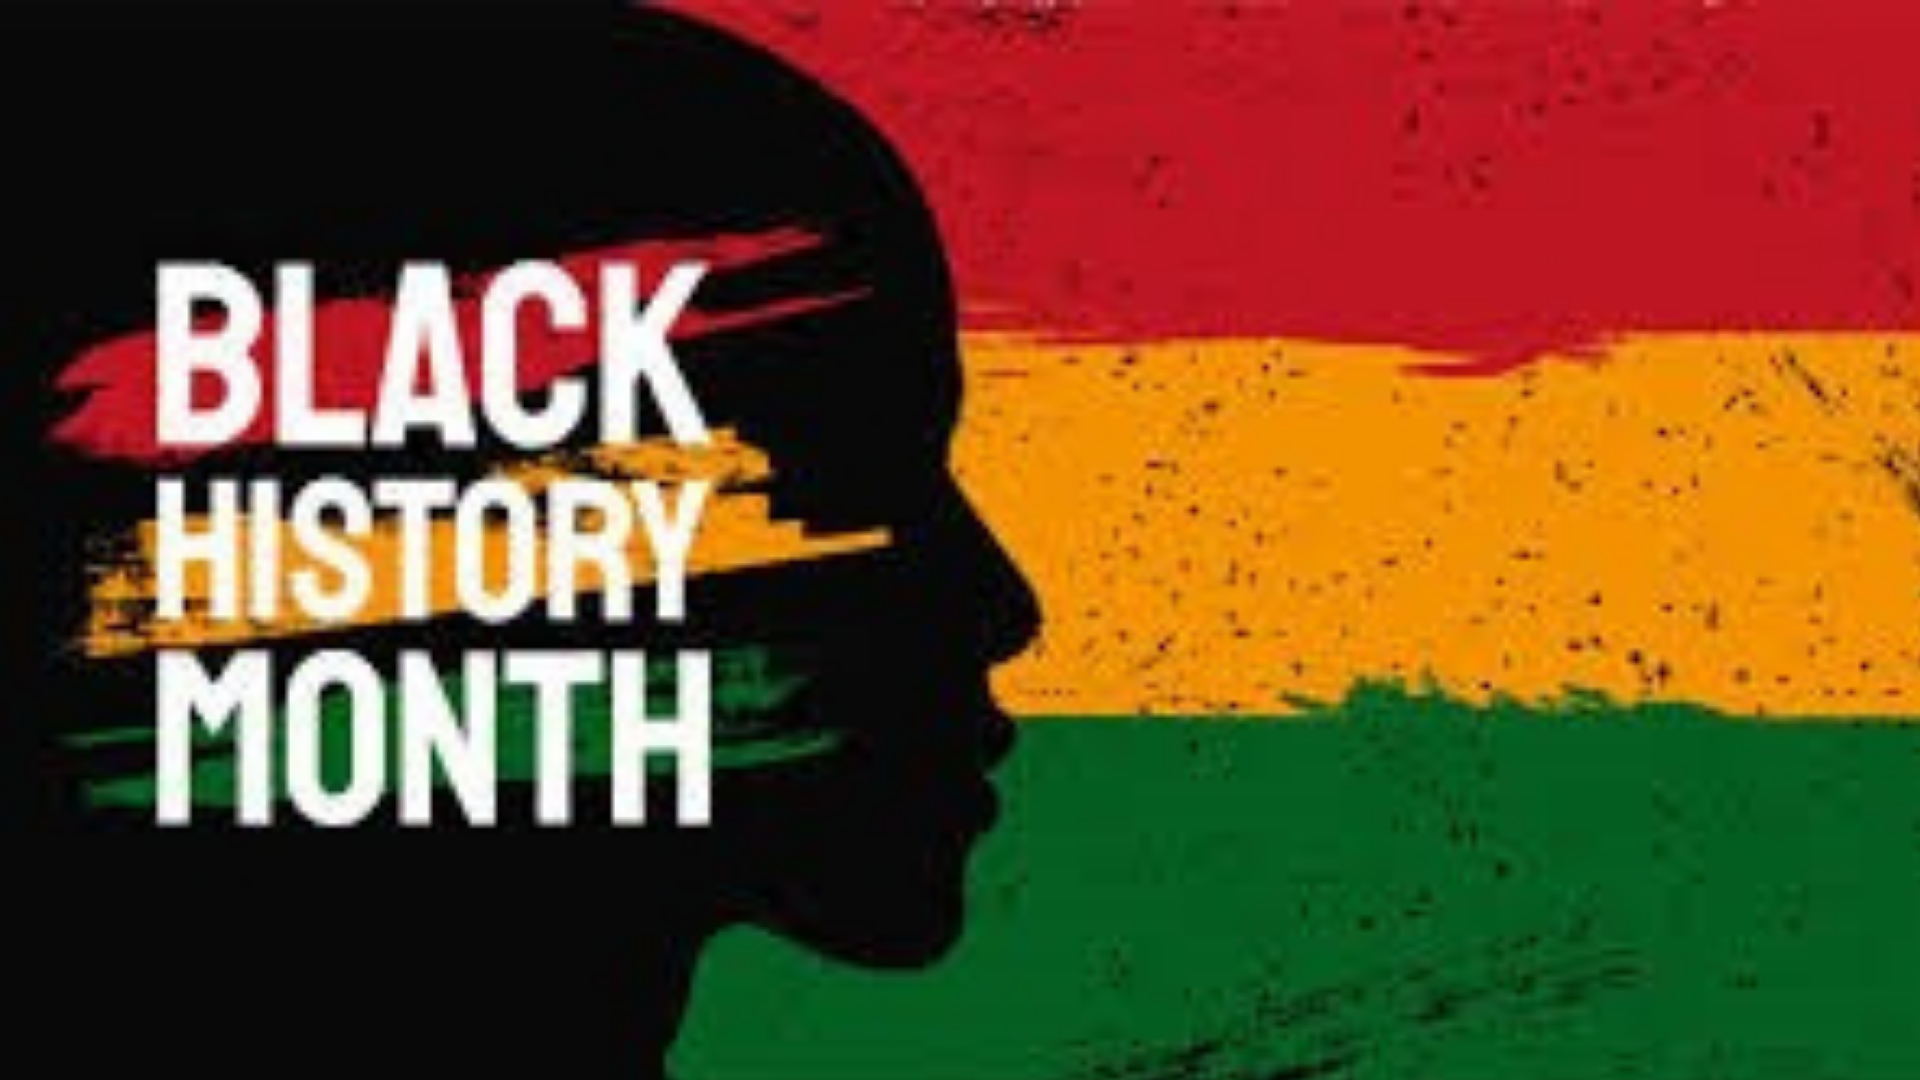 Black History Month 2022 – Focusing on the Health and Wellness of the Black community